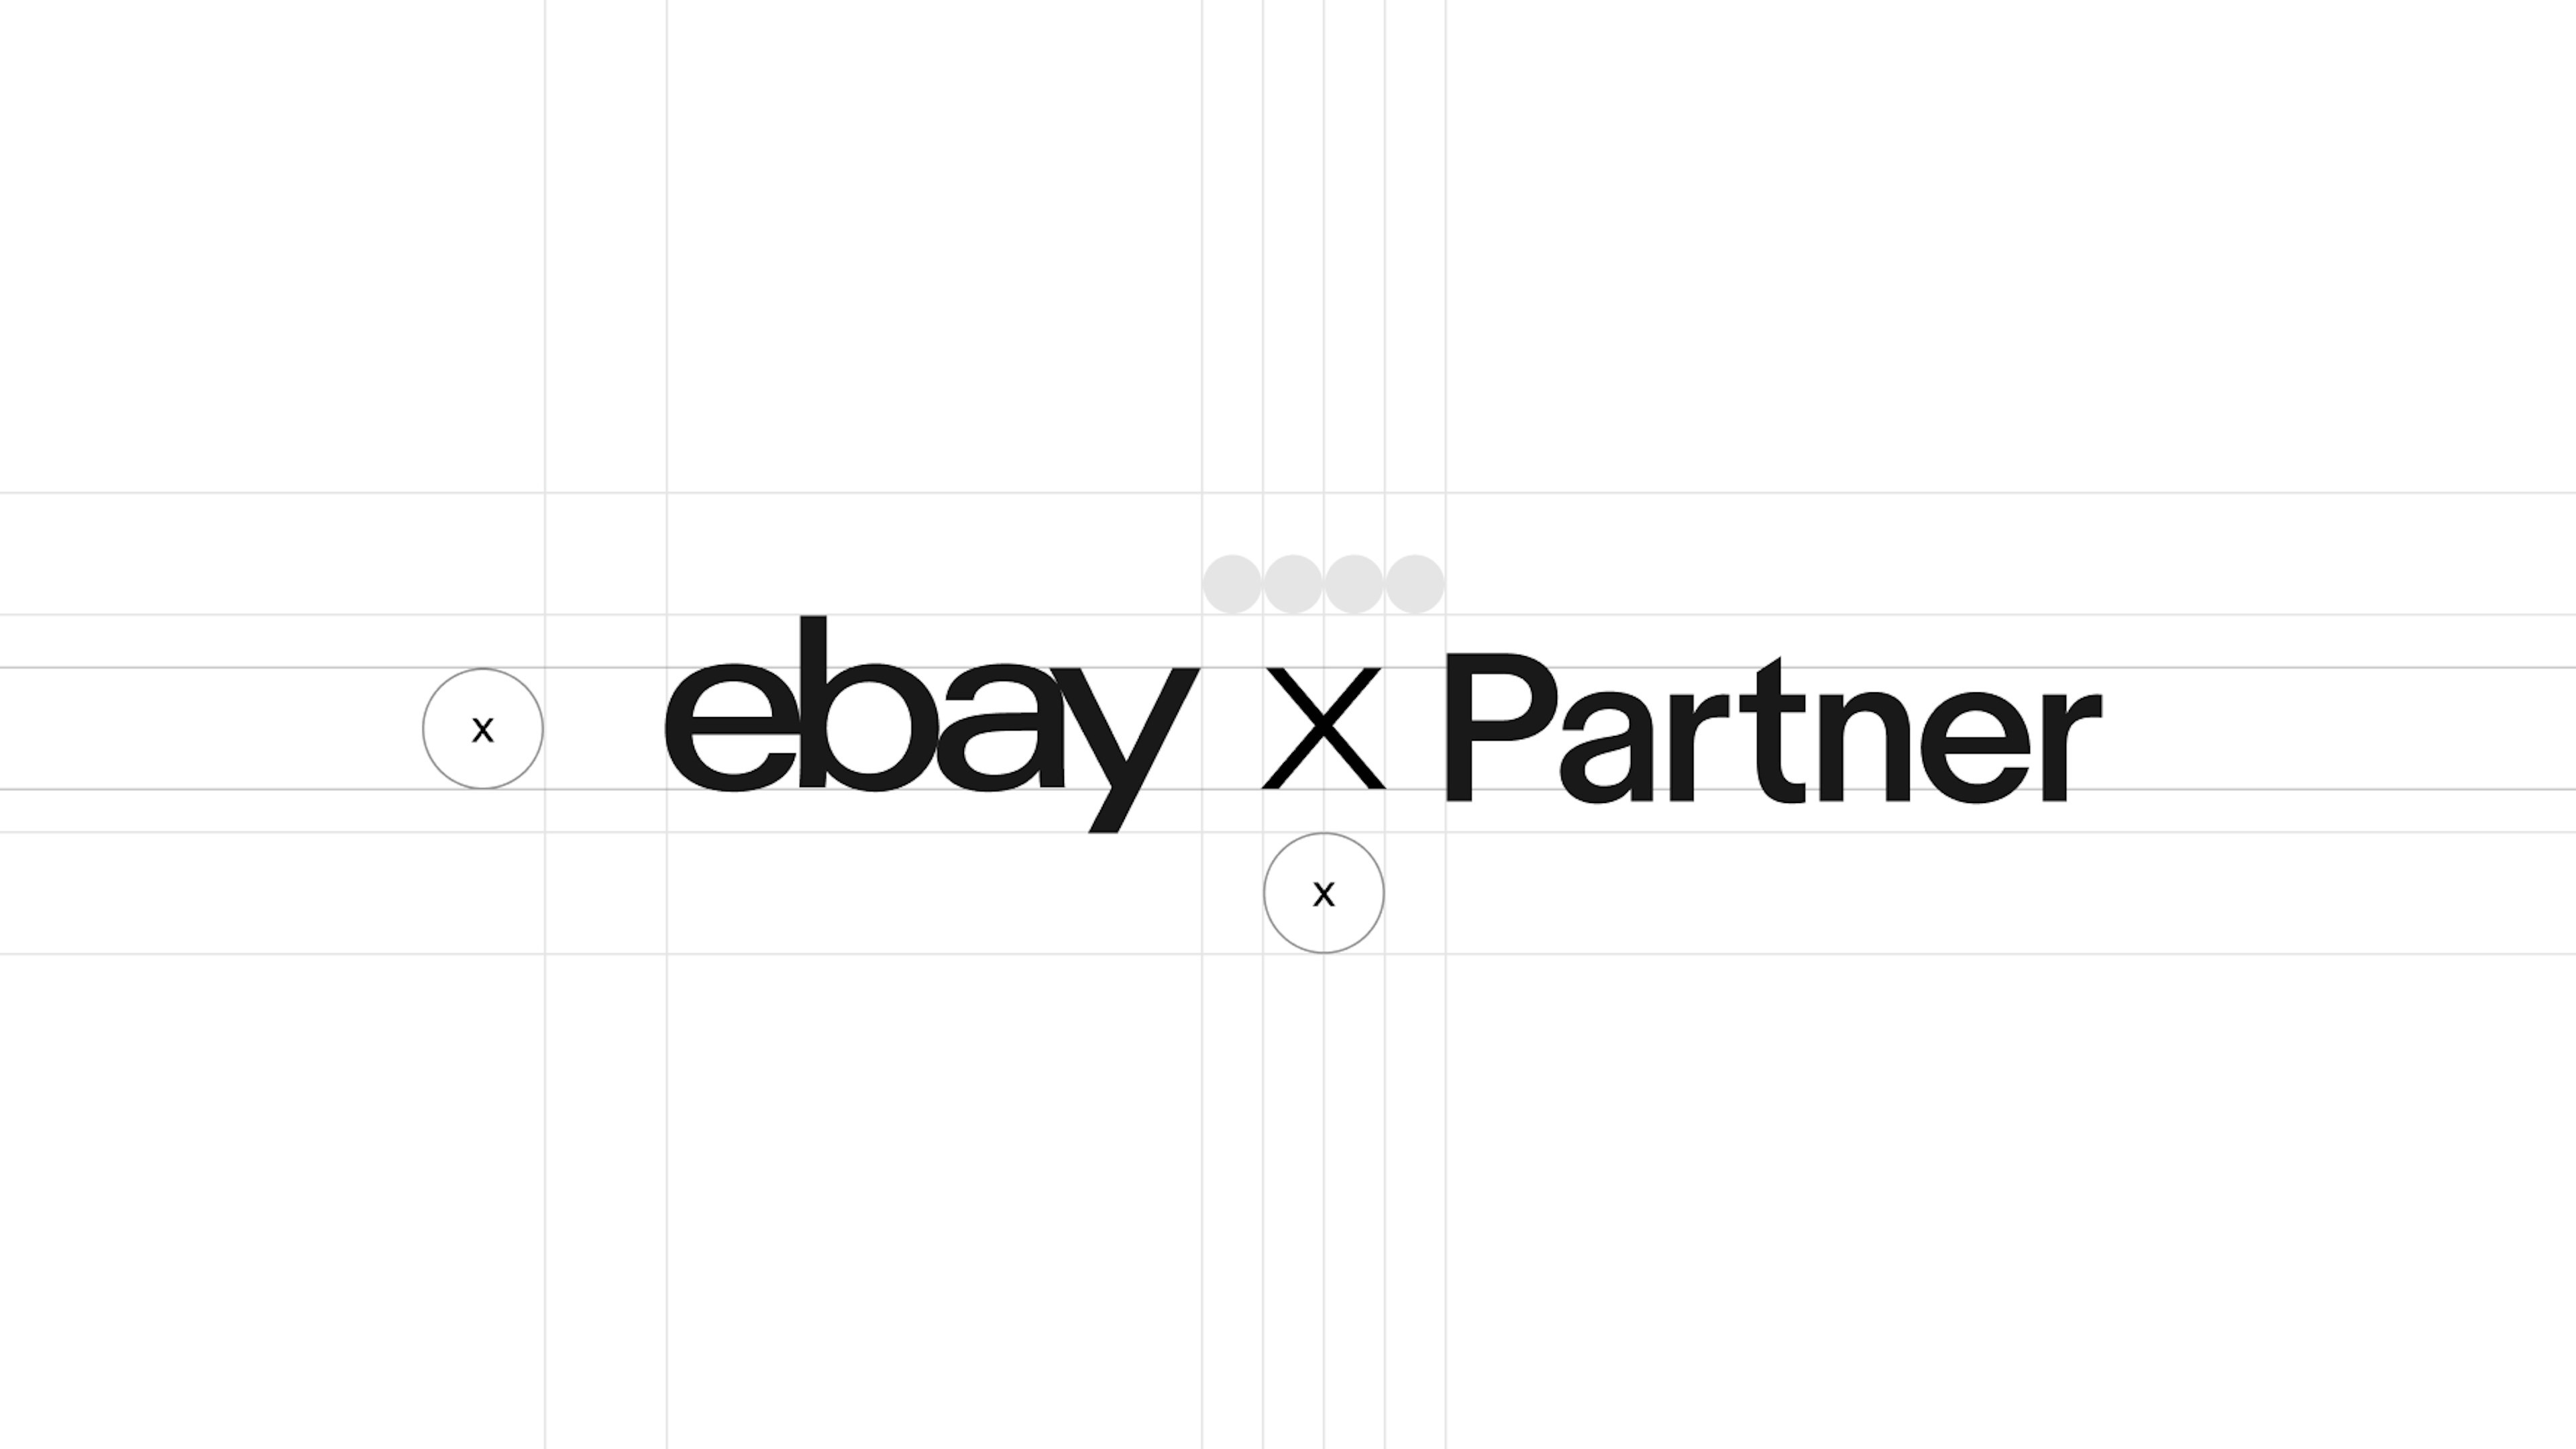 The eBay logo in black with a visual “x” placed between it and a partner logo.